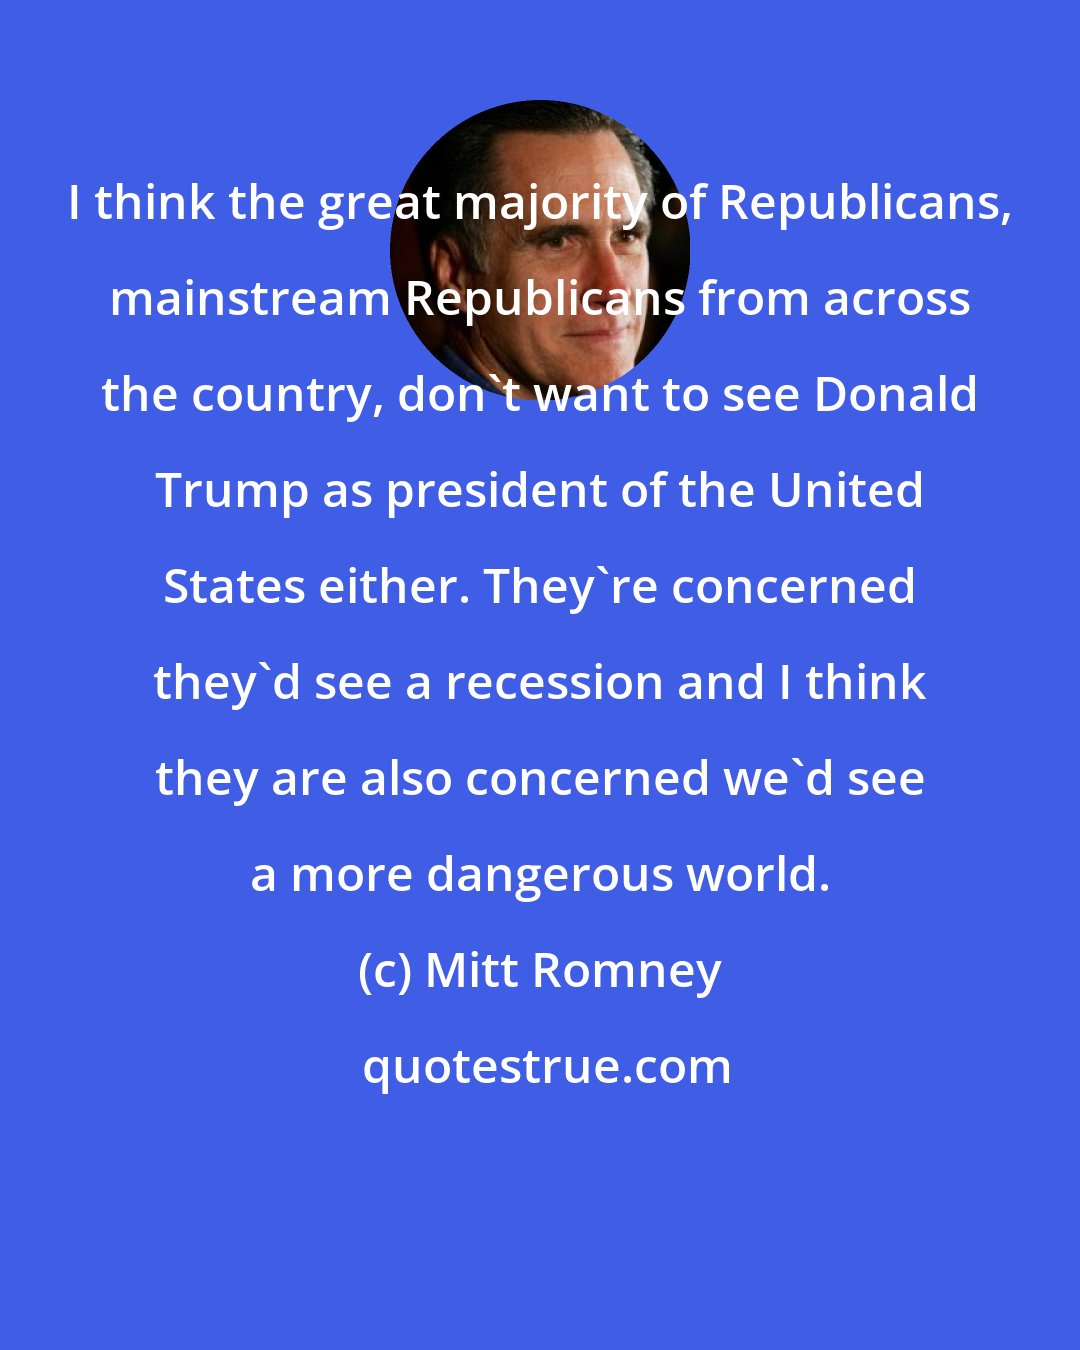 Mitt Romney: I think the great majority of Republicans, mainstream Republicans from across the country, don't want to see Donald Trump as president of the United States either. They're concerned they'd see a recession and I think they are also concerned we'd see a more dangerous world.